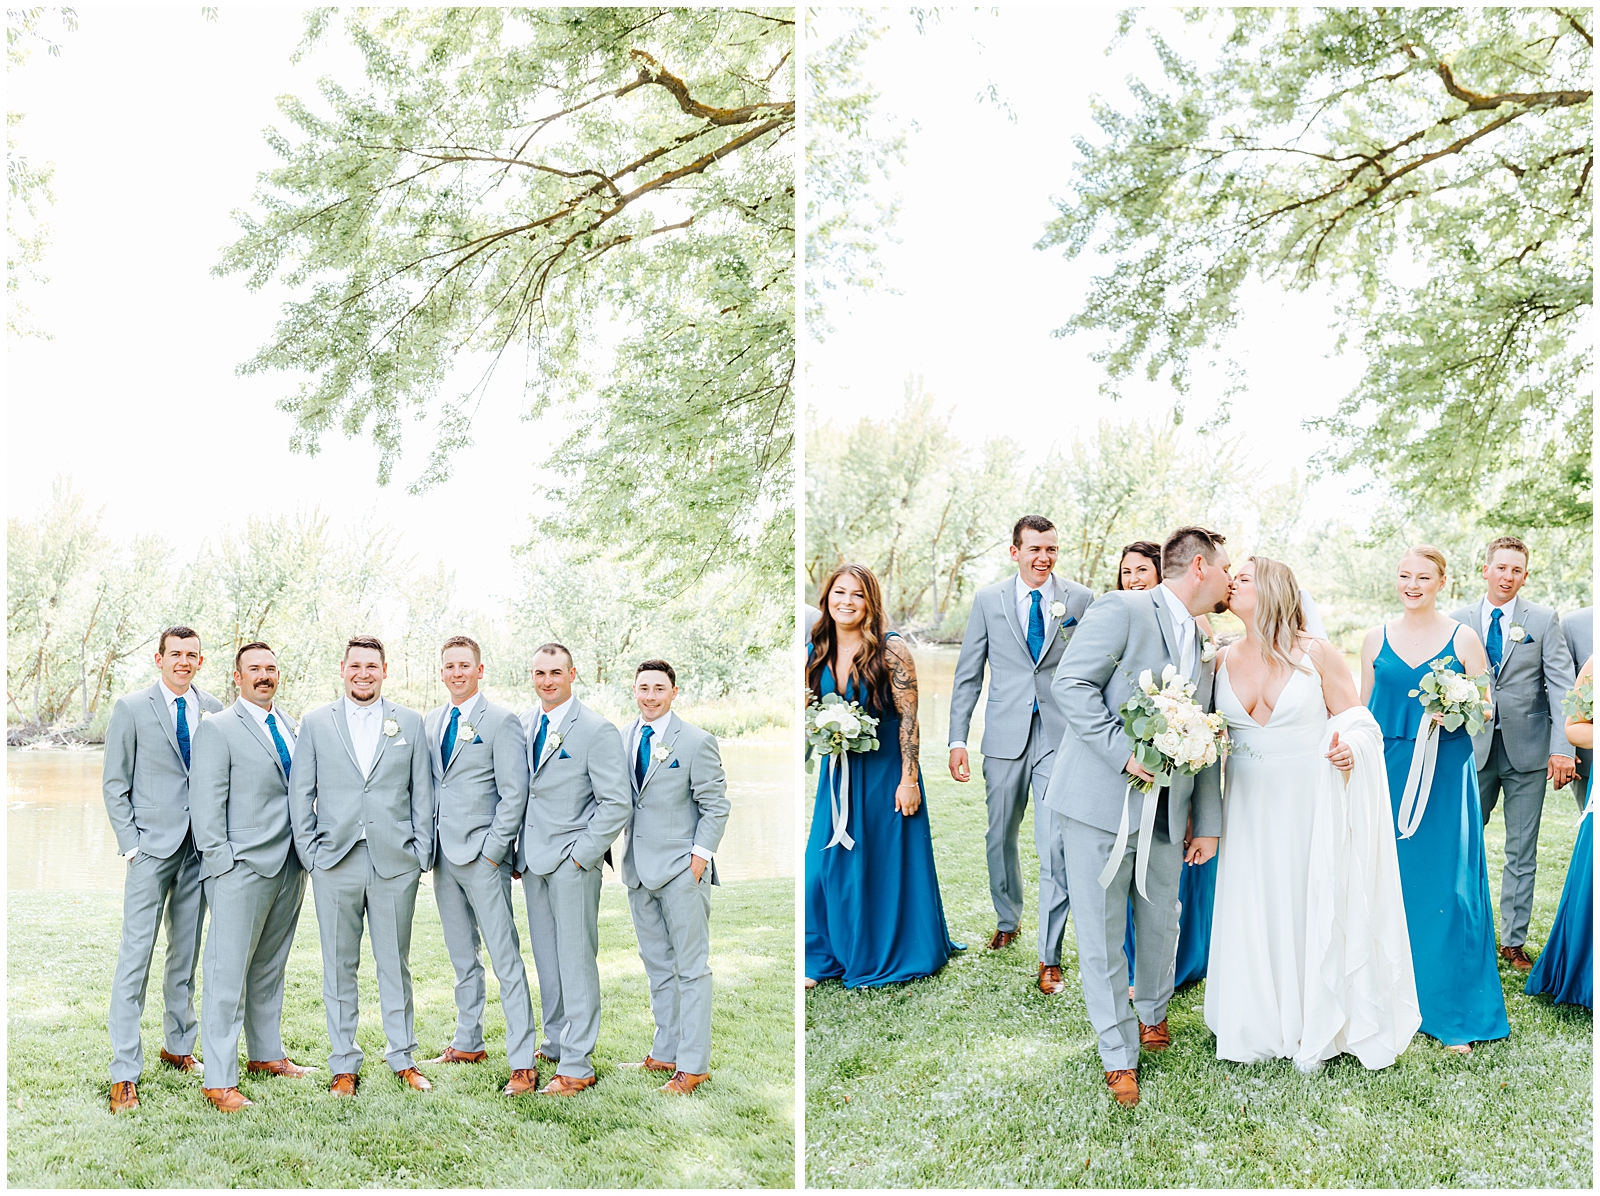 Teal and Light Grey Bridal Party